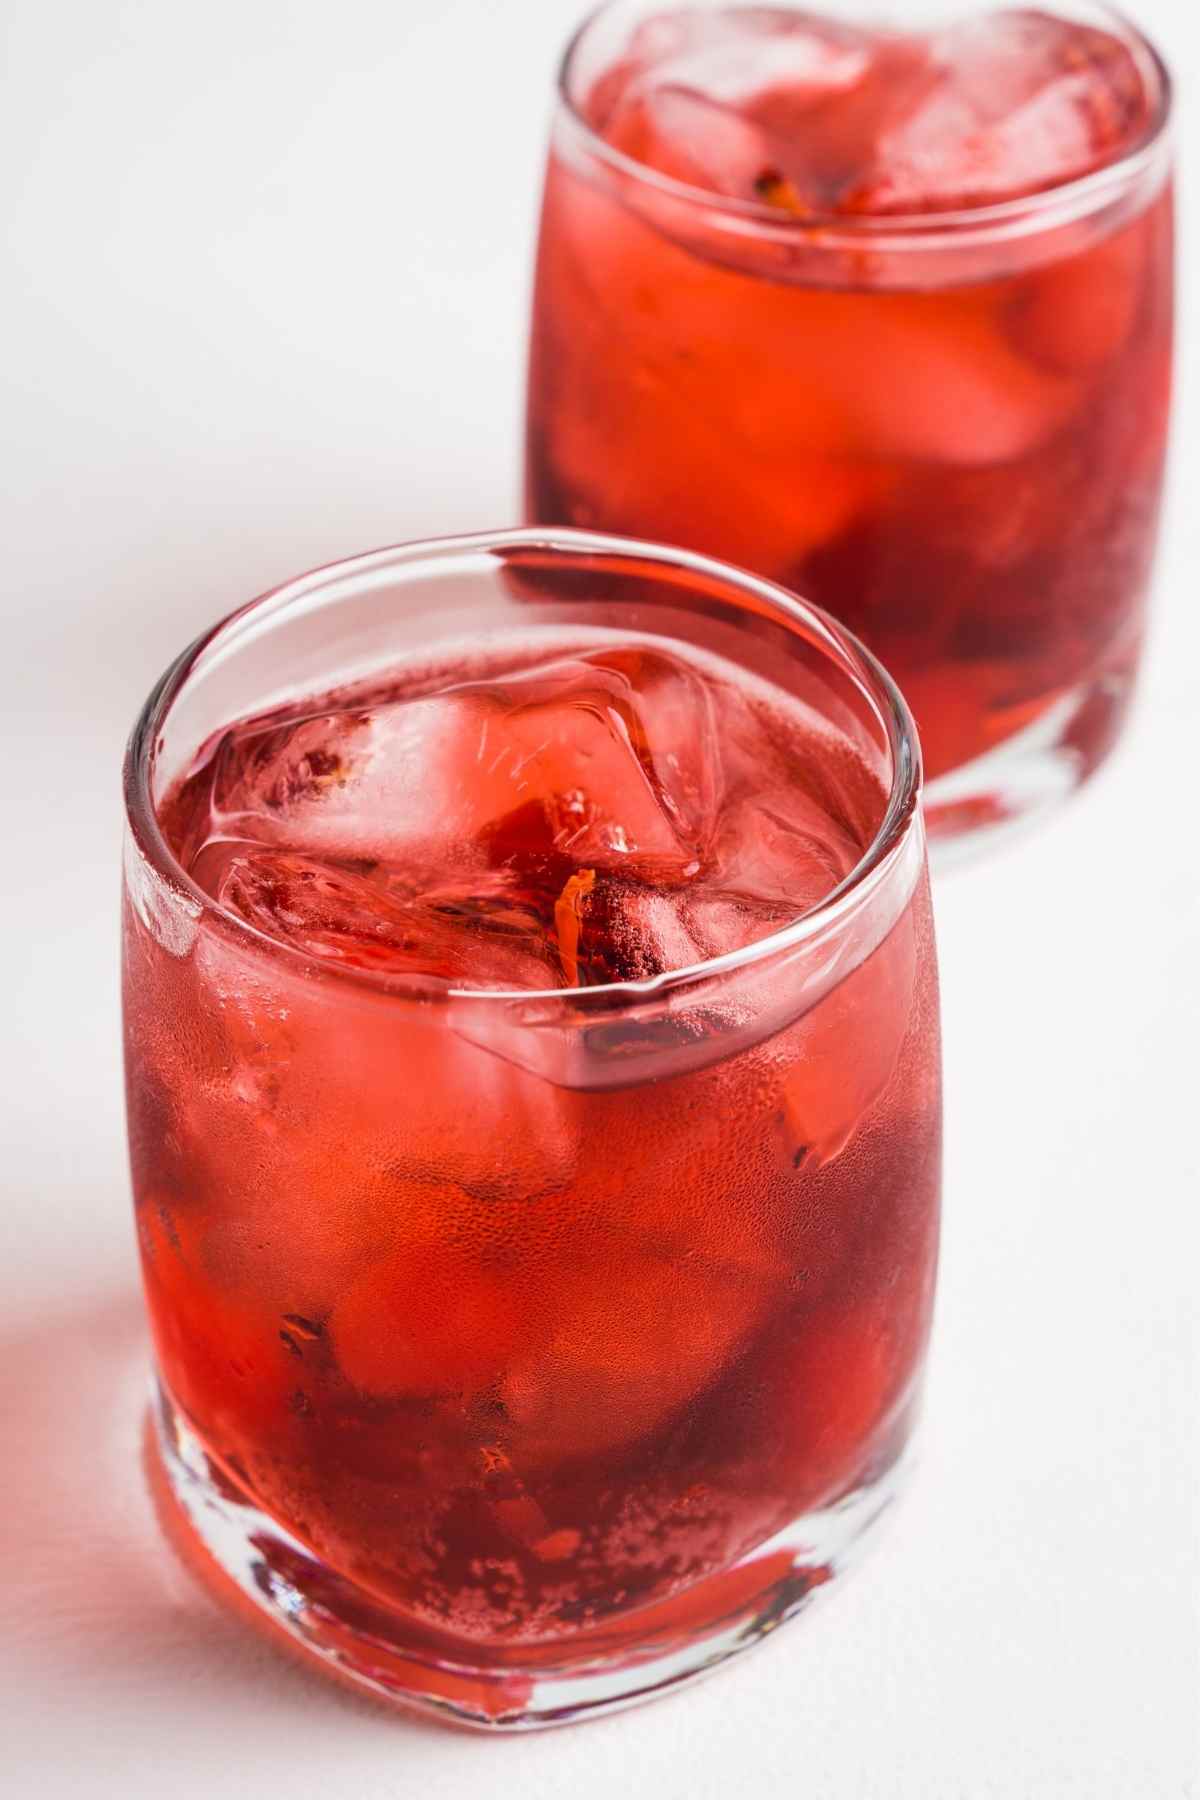 This Royal Flush cocktail is a delicious combination of peach schnapps, Crown Royal whiskey, and tart cranberry juice. It’s the perfect blend of sweet and tart flavors and is easy to drink.